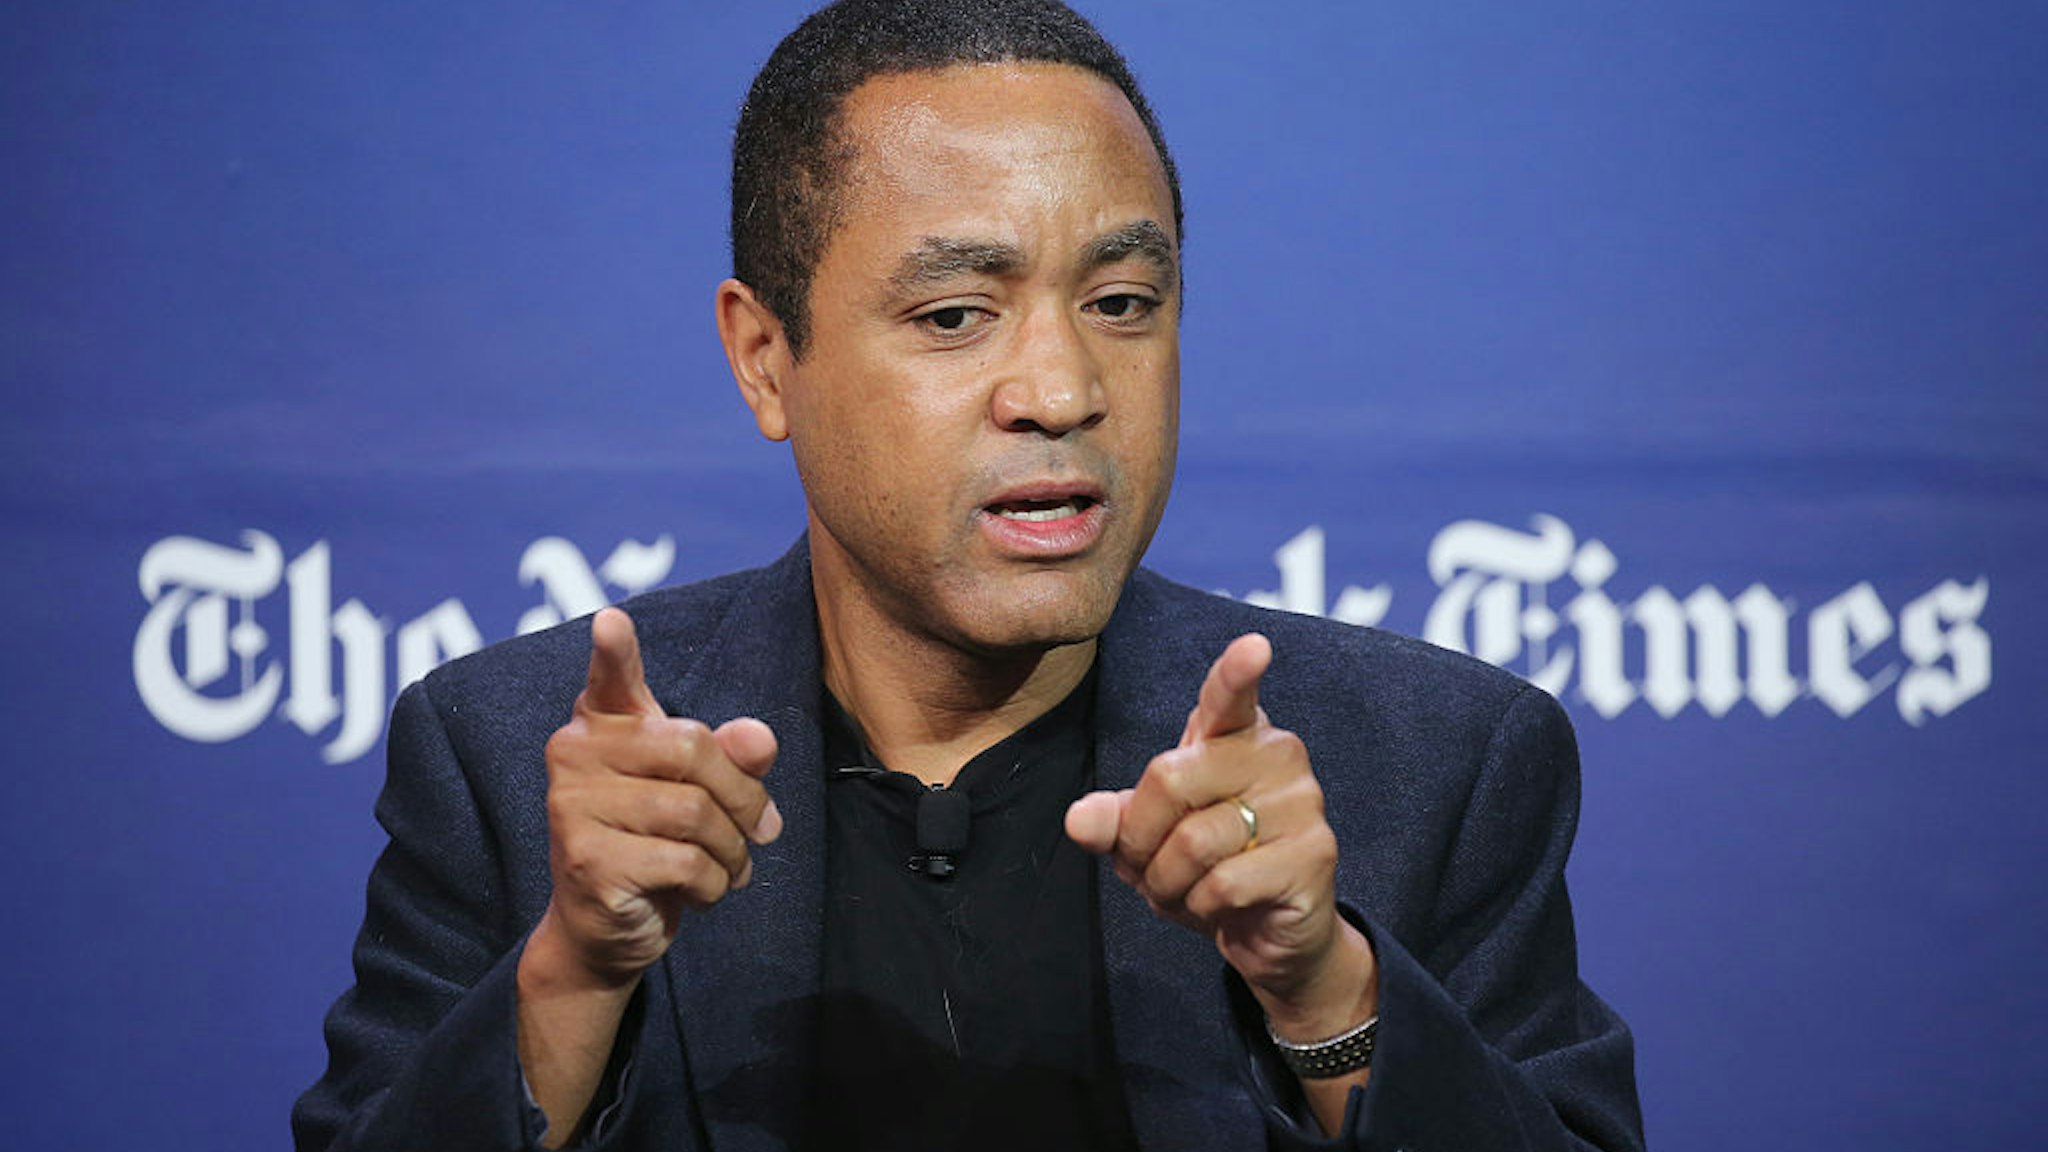 Author, columnist and professor at Columbia University, John McWhorter speaks onstage during the New York Times Schools for Tomorrow conference at New York Times Building on September 17, 2015 in New York City. (Photo by Neilson Barnard/Getty Images for New York Times)